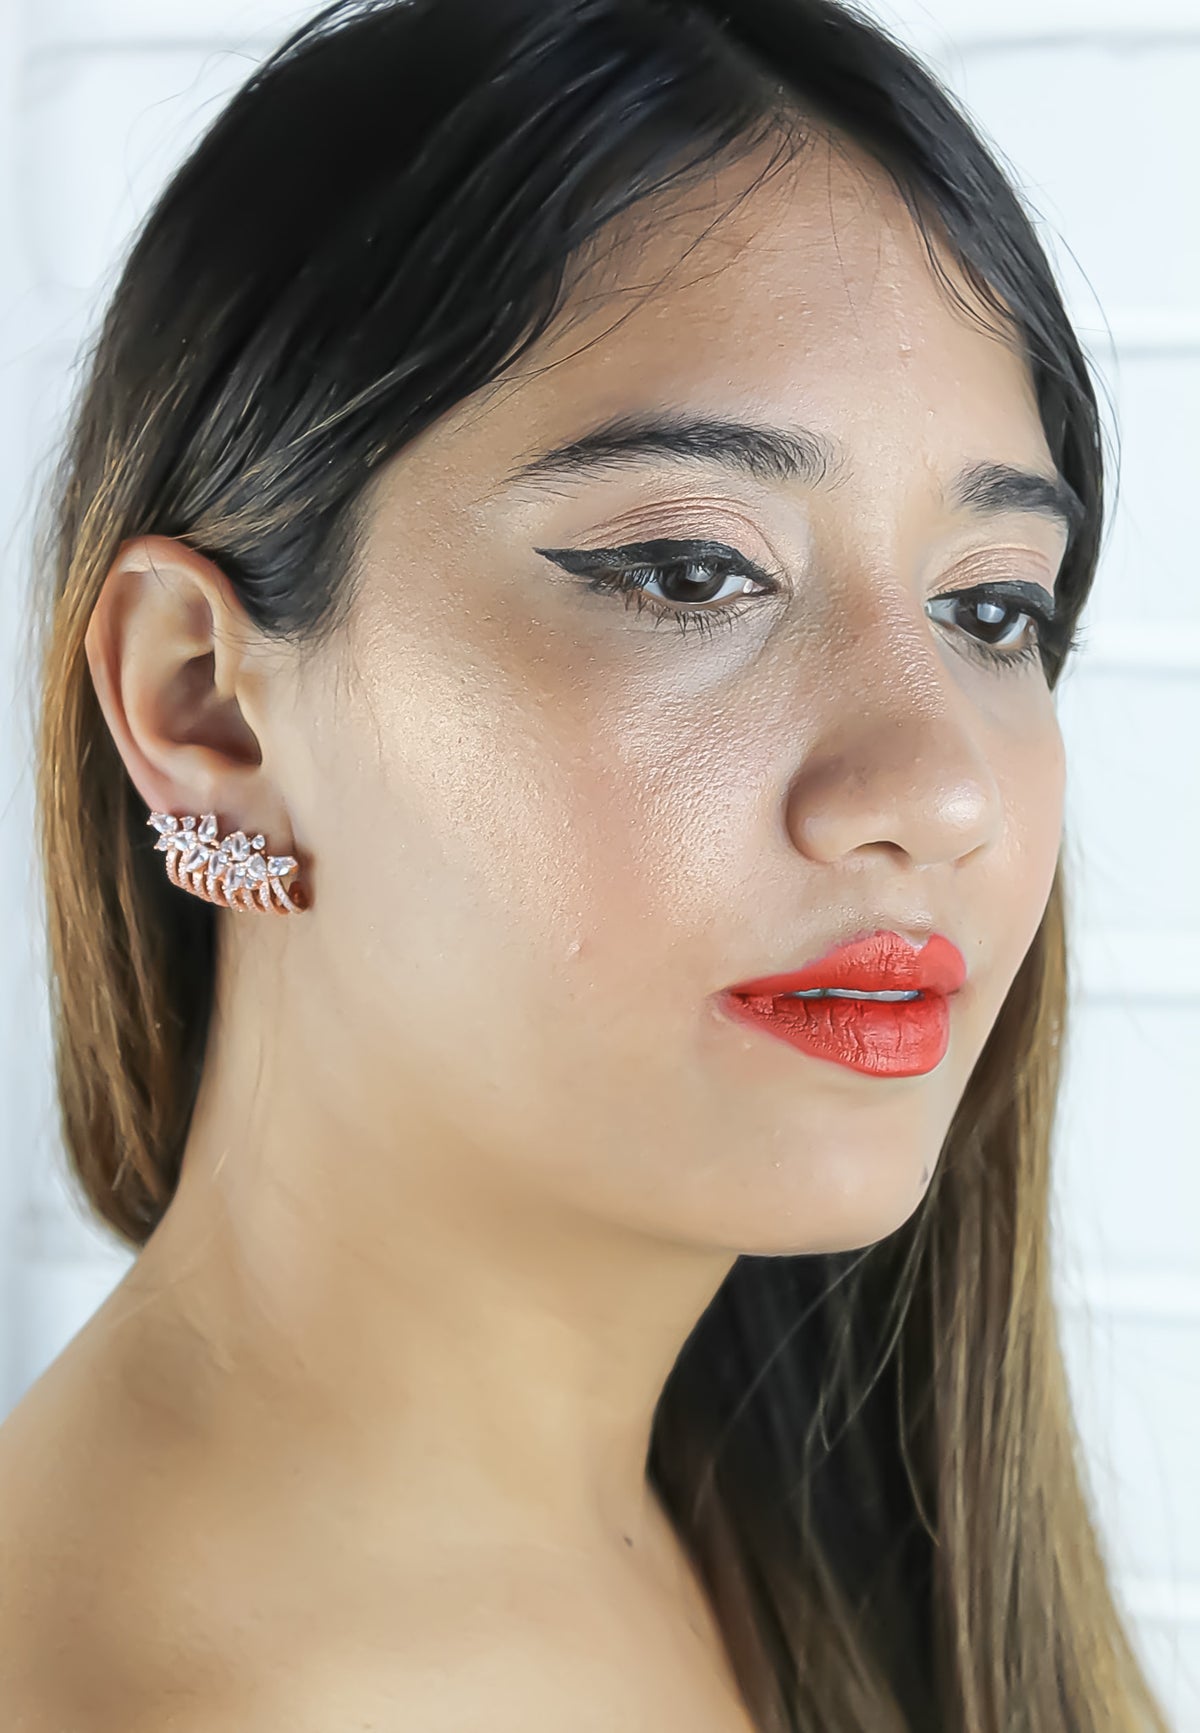 london climber earrings with stones Bombay Sunset